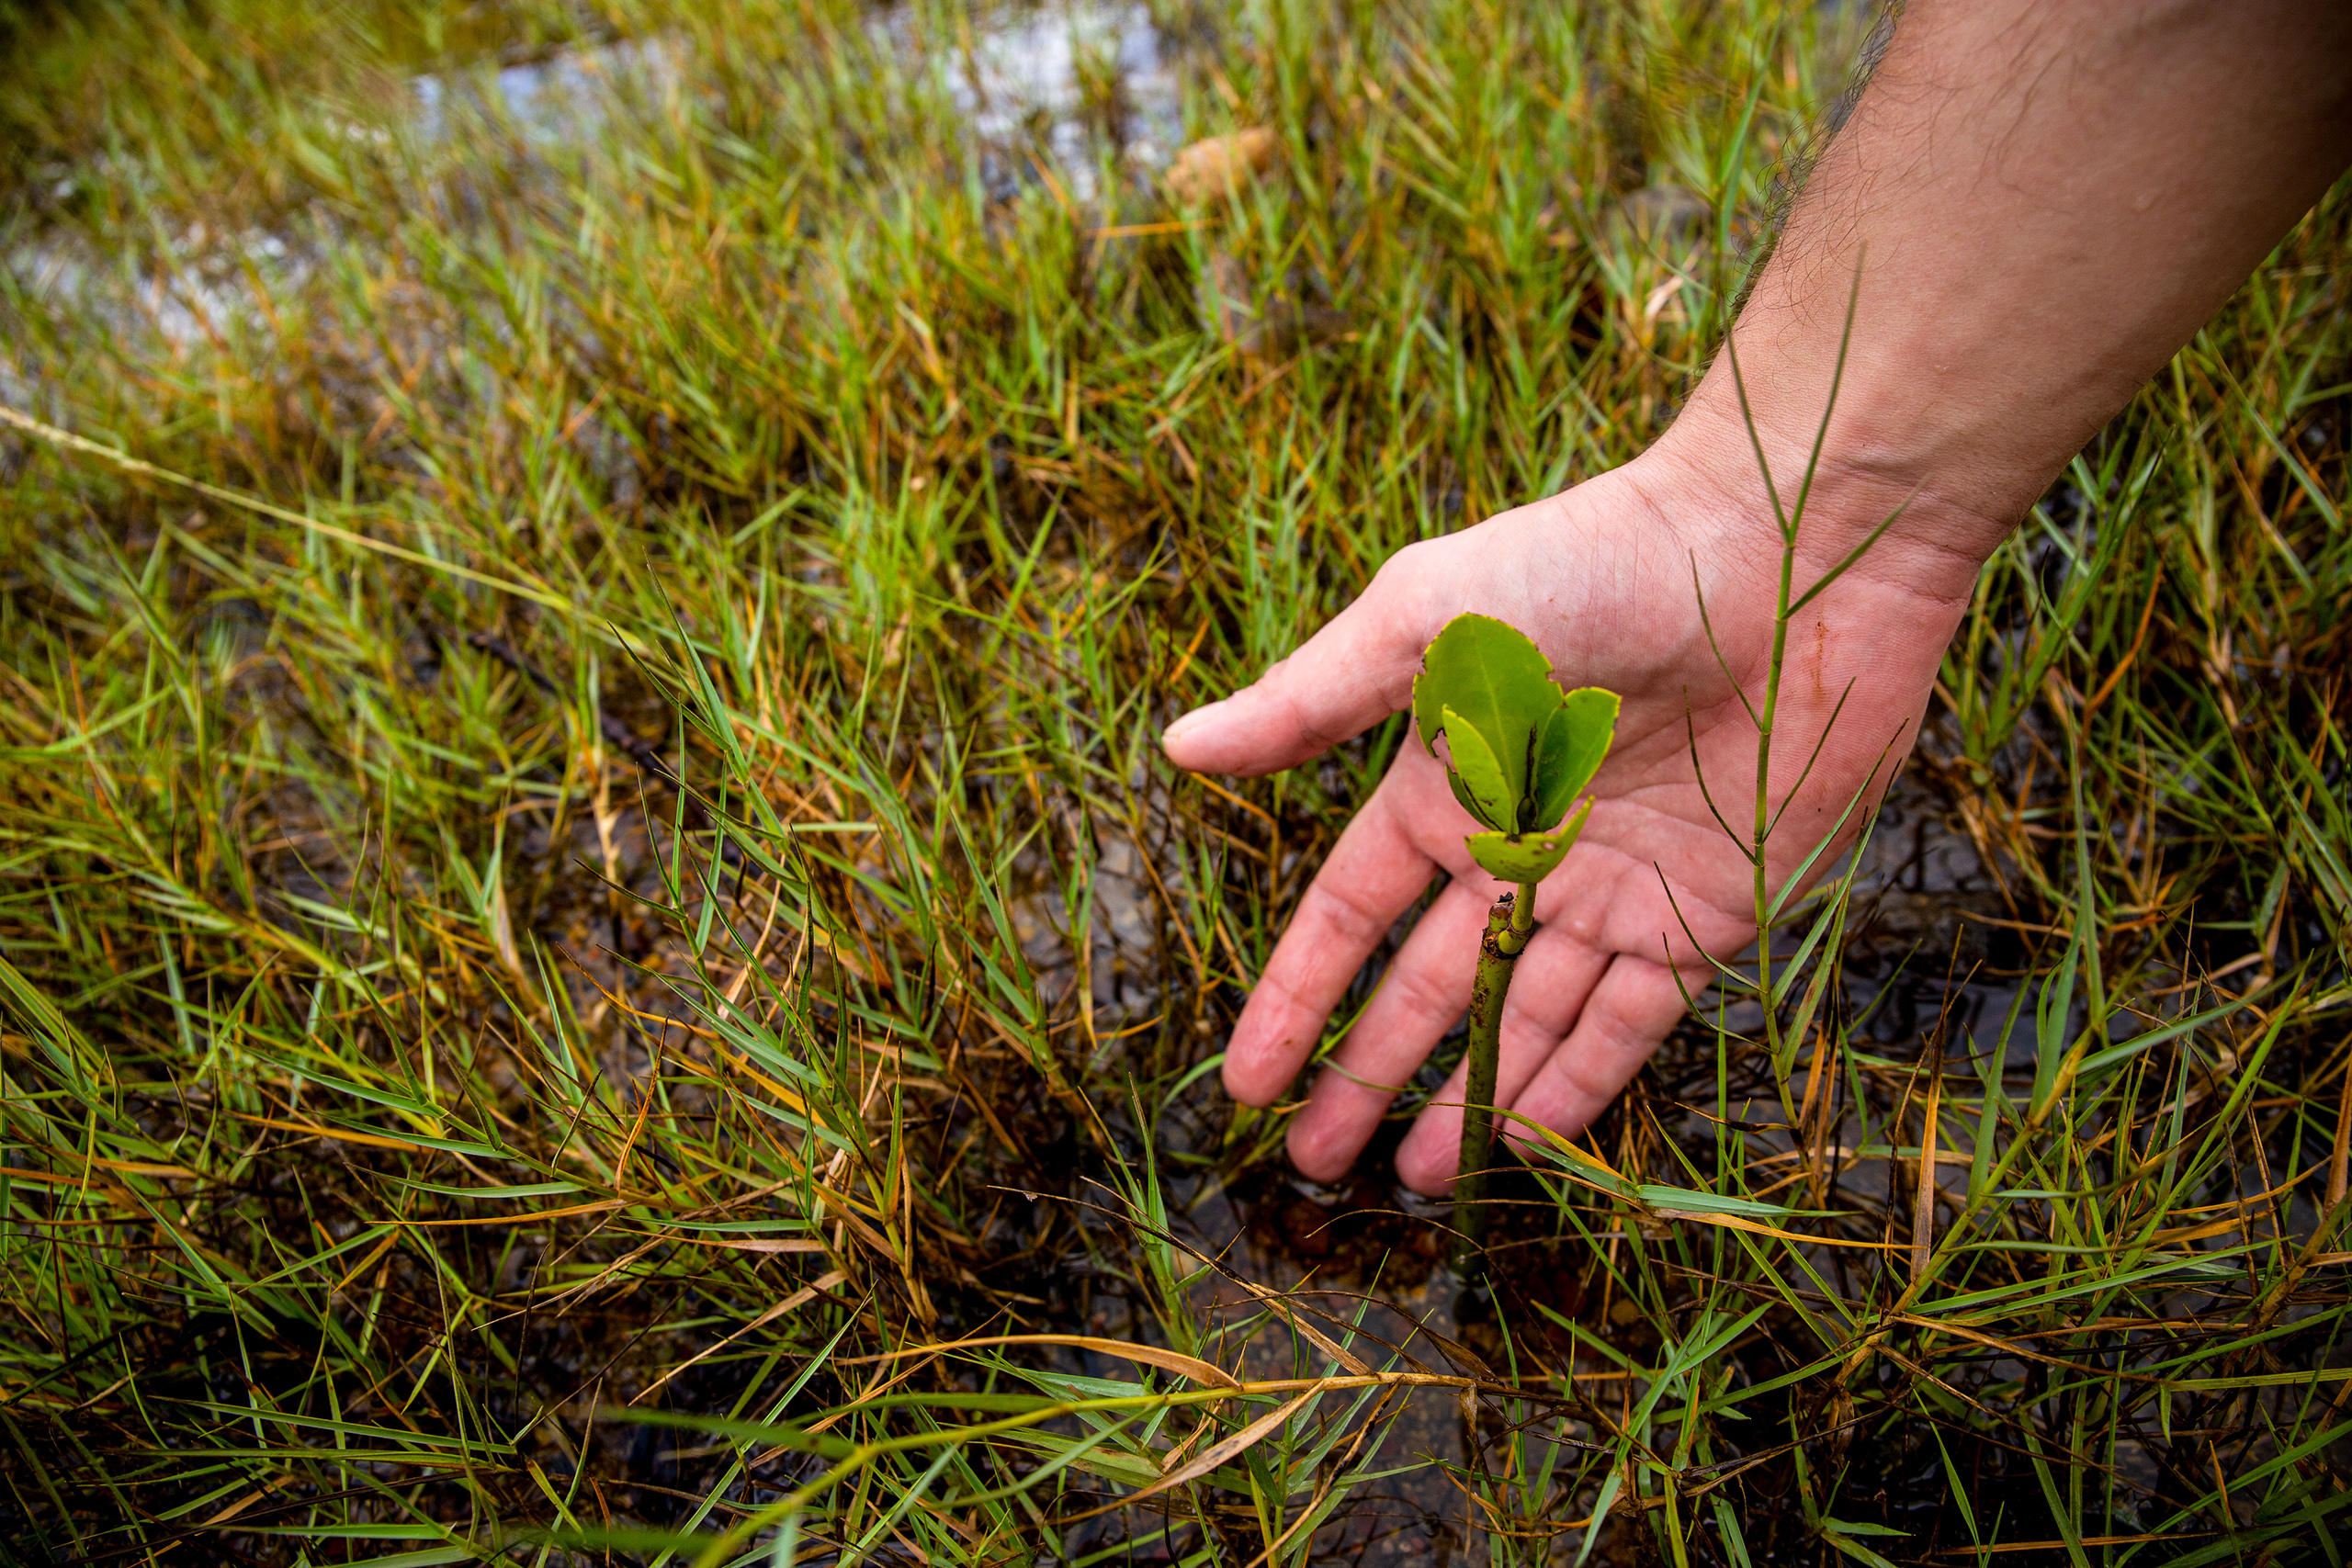 <p>Bartosz Majcher, a tropical ecologist at the University of Hong Kong, points to a mangrove sapling growing in Three Fathoms Cove. With its mangroves, mudflats and sandy shores, this is one of Hong Kong’s most ecologically diverse locations. Hong Kong has lost almost all of its mangroves due to coastal development. (Image: Katherine Cheng / China Dialogue)</p>